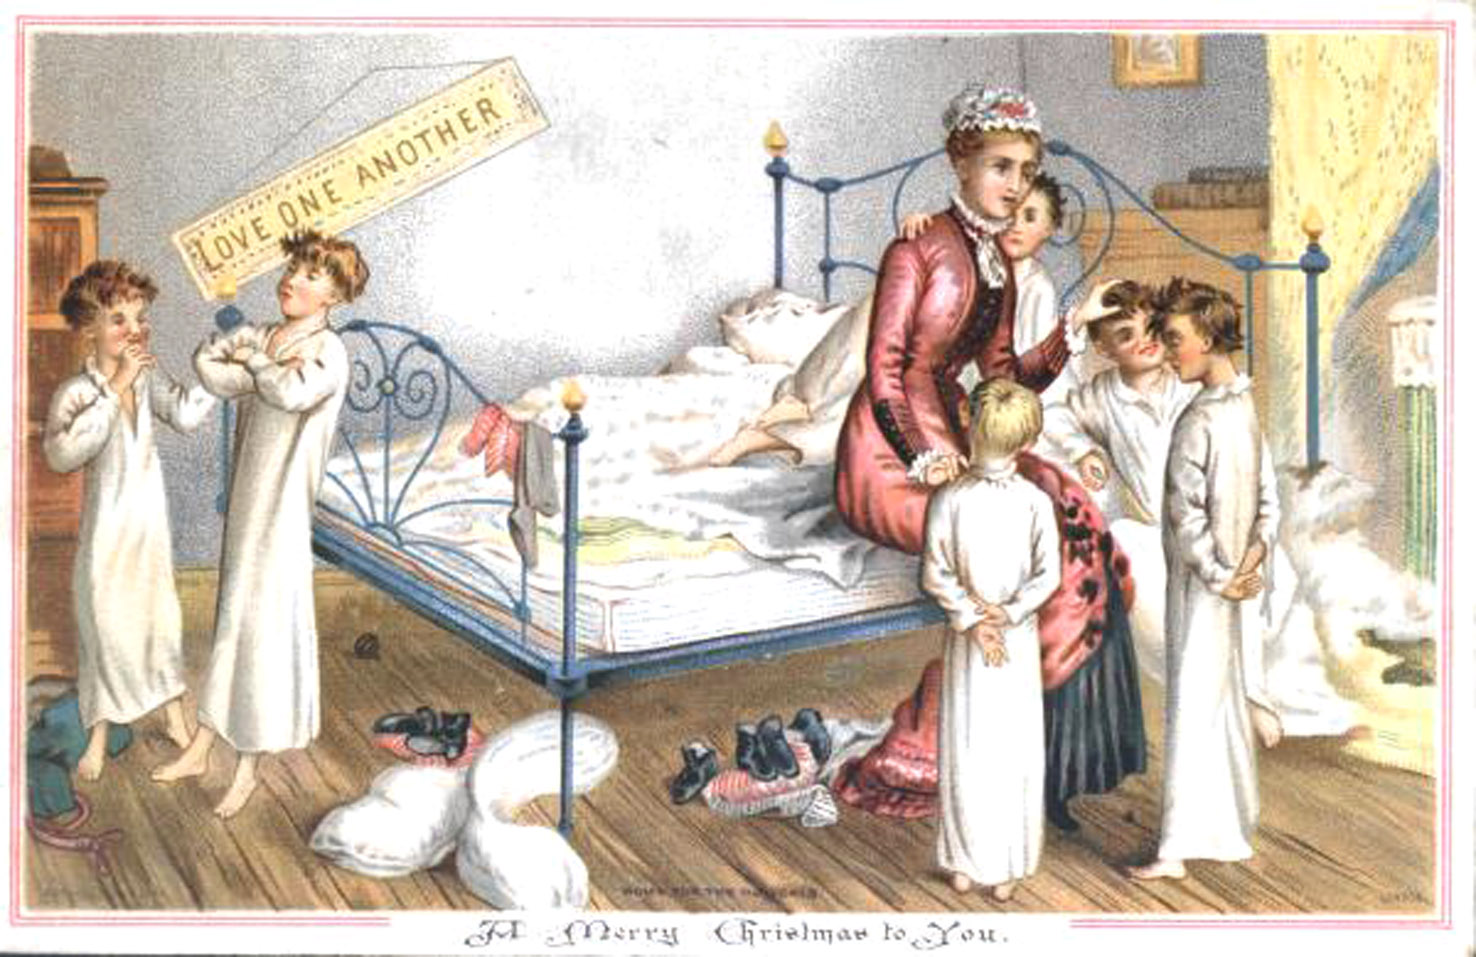 Boys in bedroom 1881 - No 04 in series of four amusing vintage Christmas cards